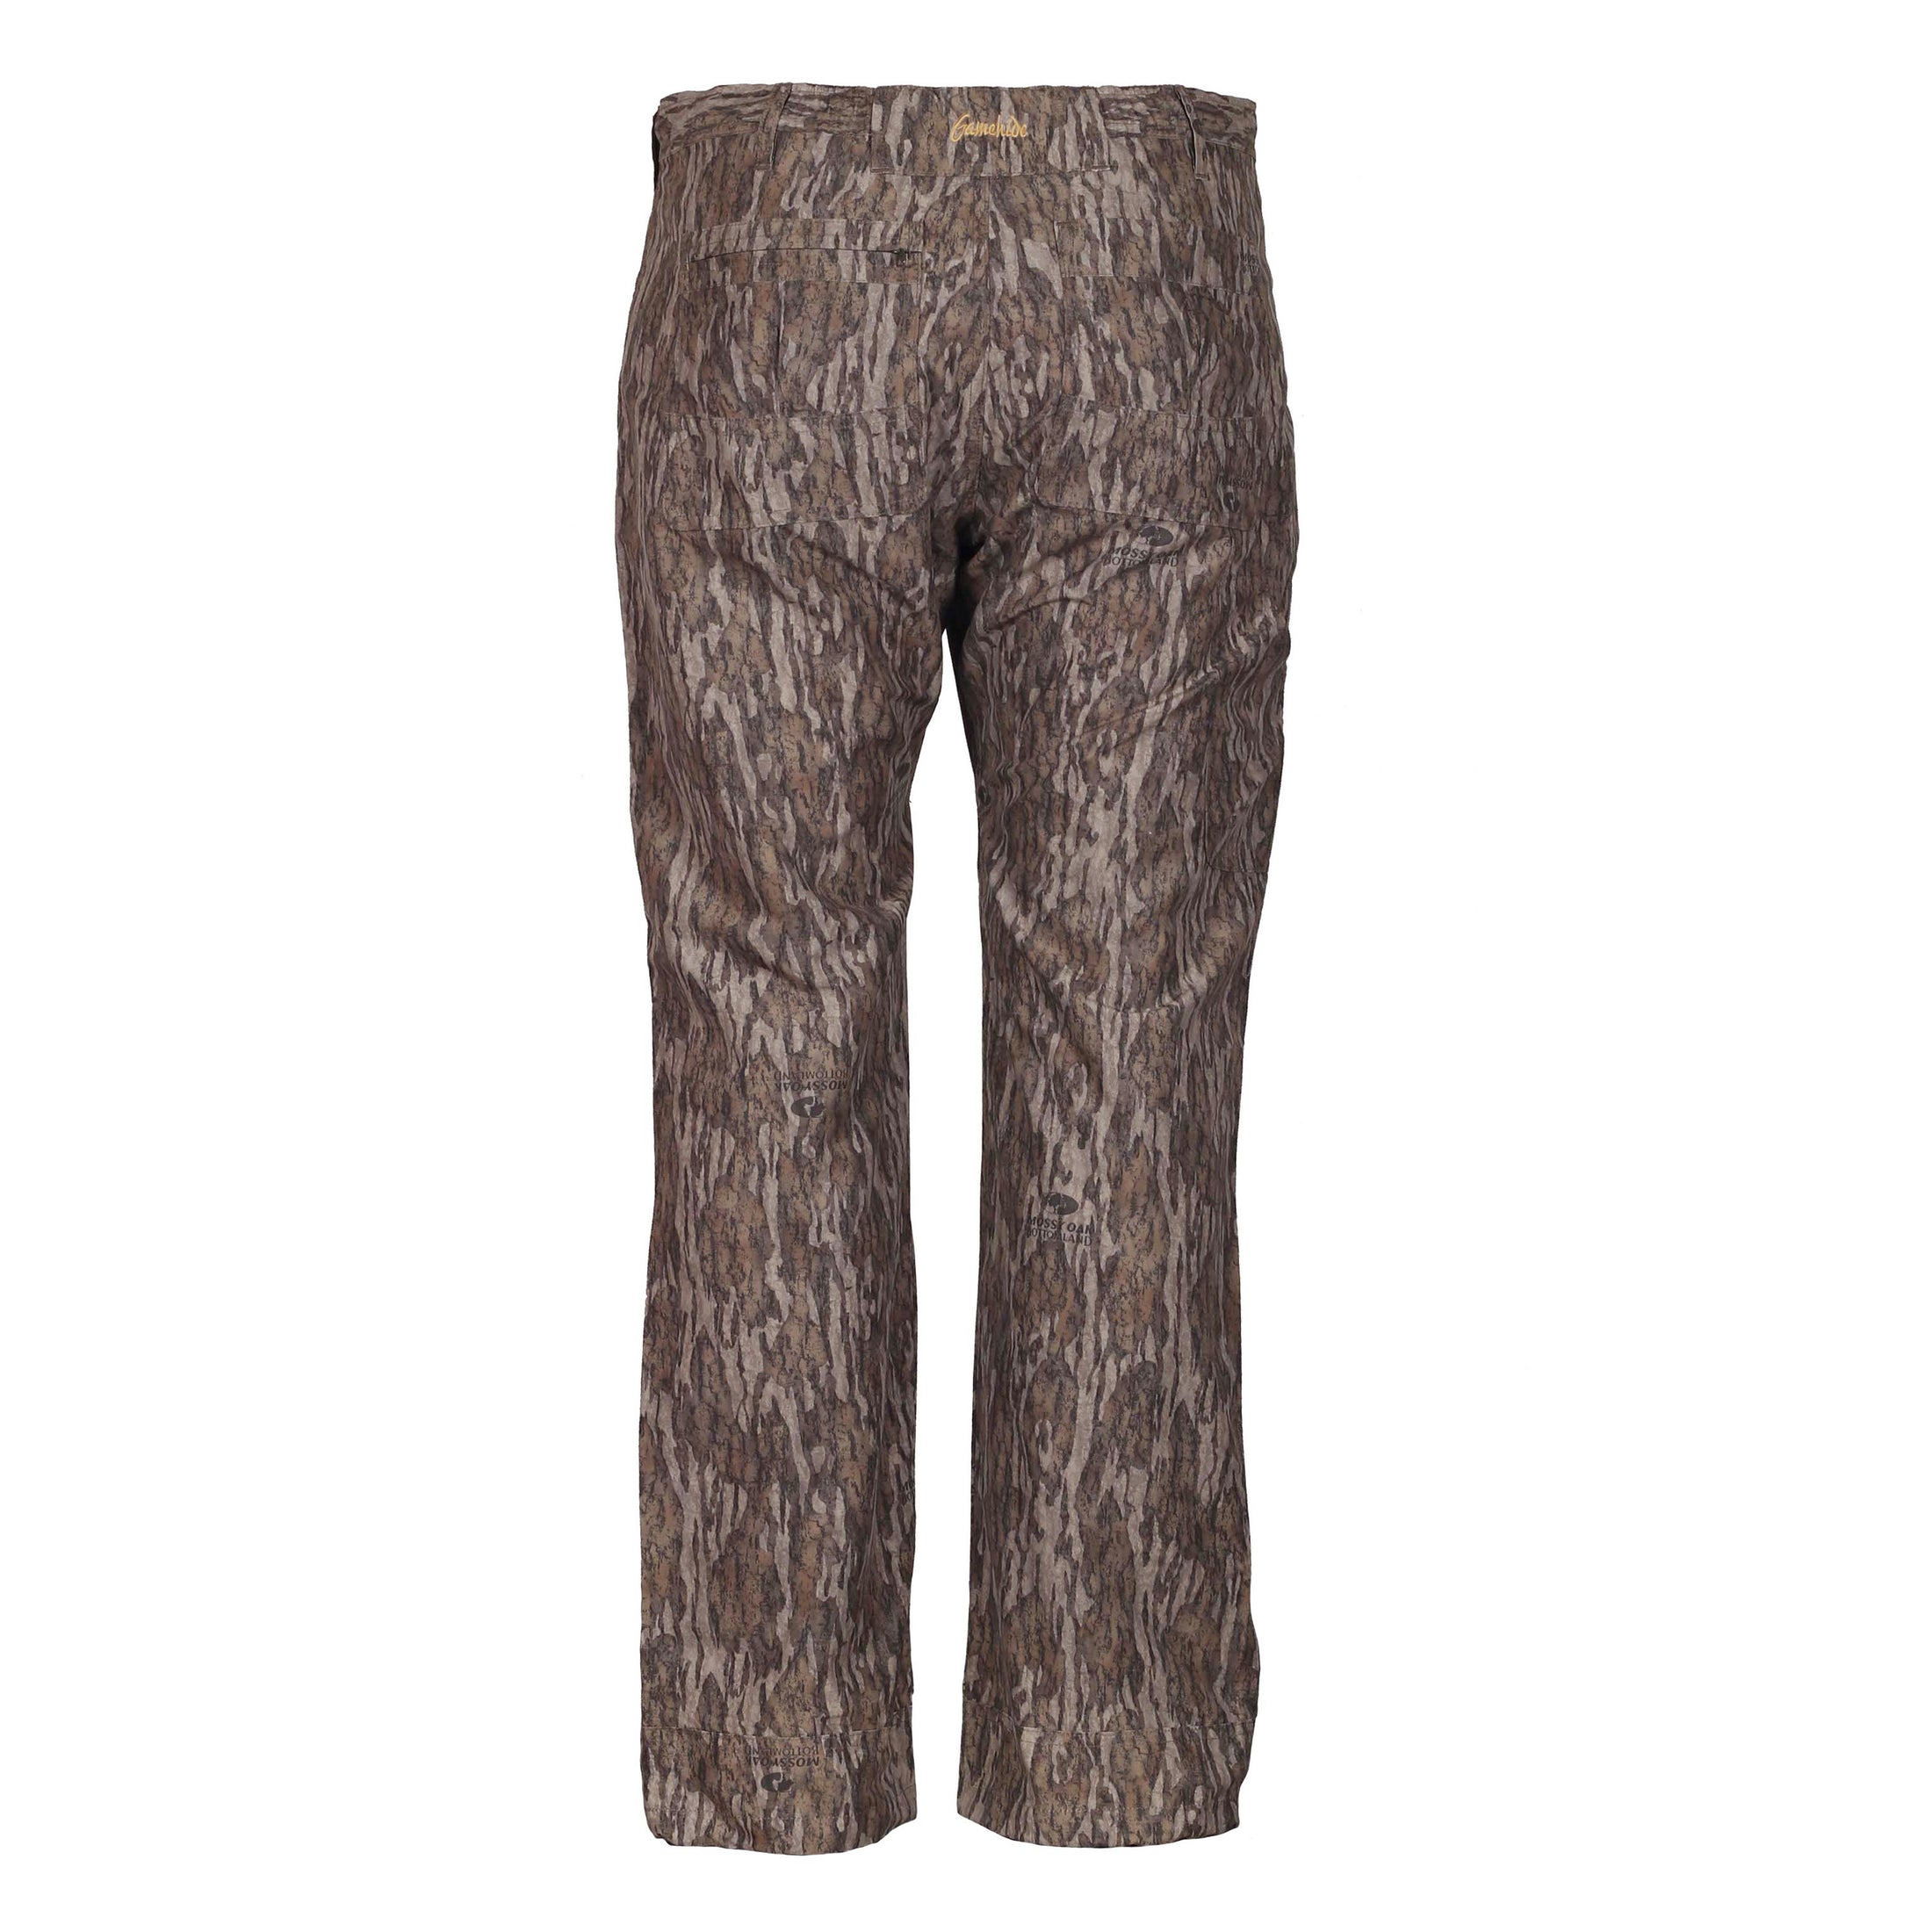 gamehide ultra lite pant back view (mossy oak new bottomland)